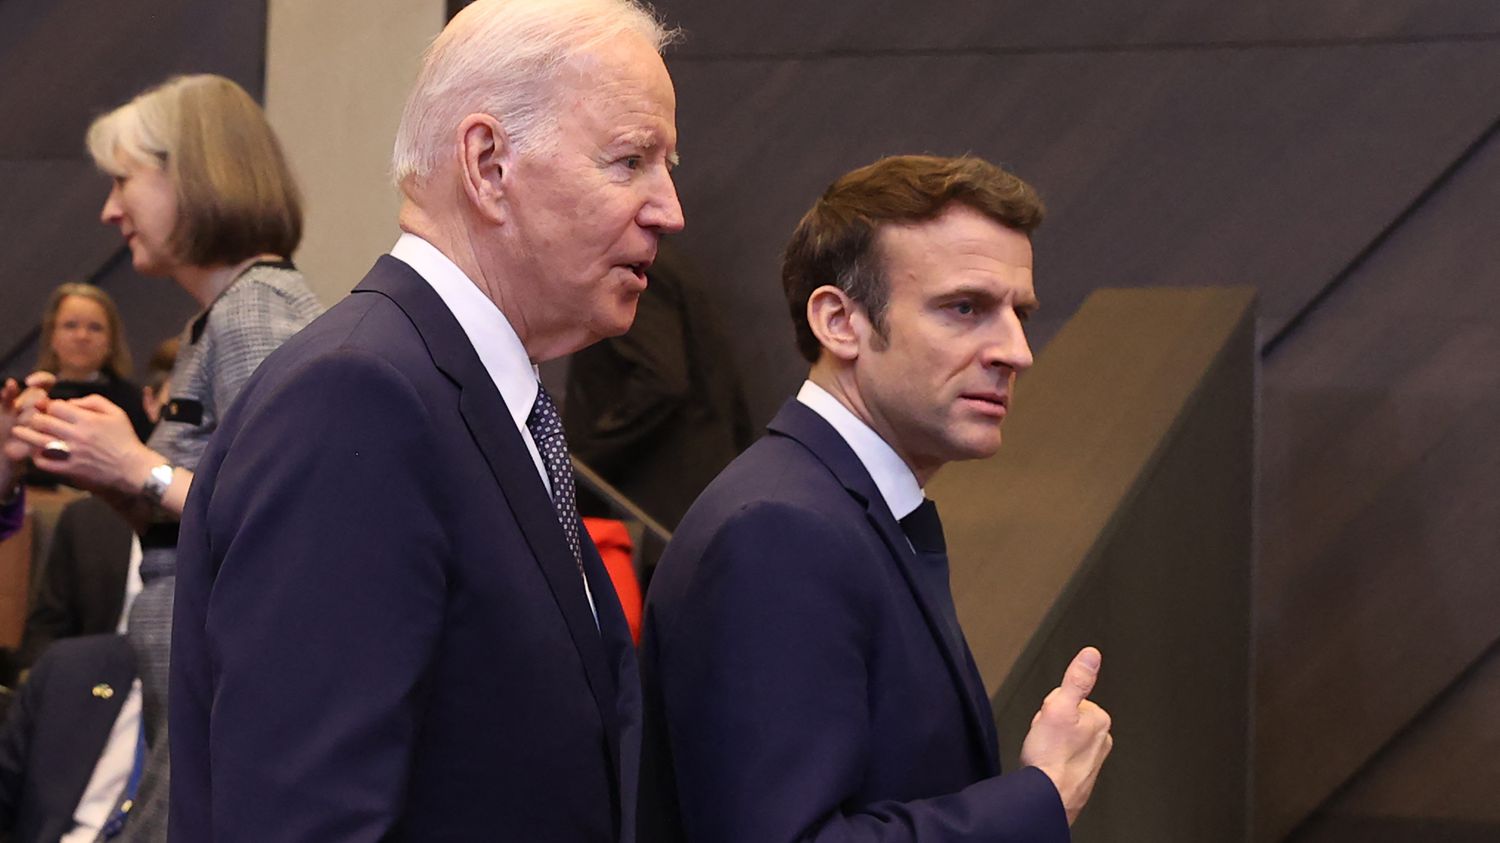 Joe Biden will receive Emmanuel Macron at the White House for a state visit on December 1
